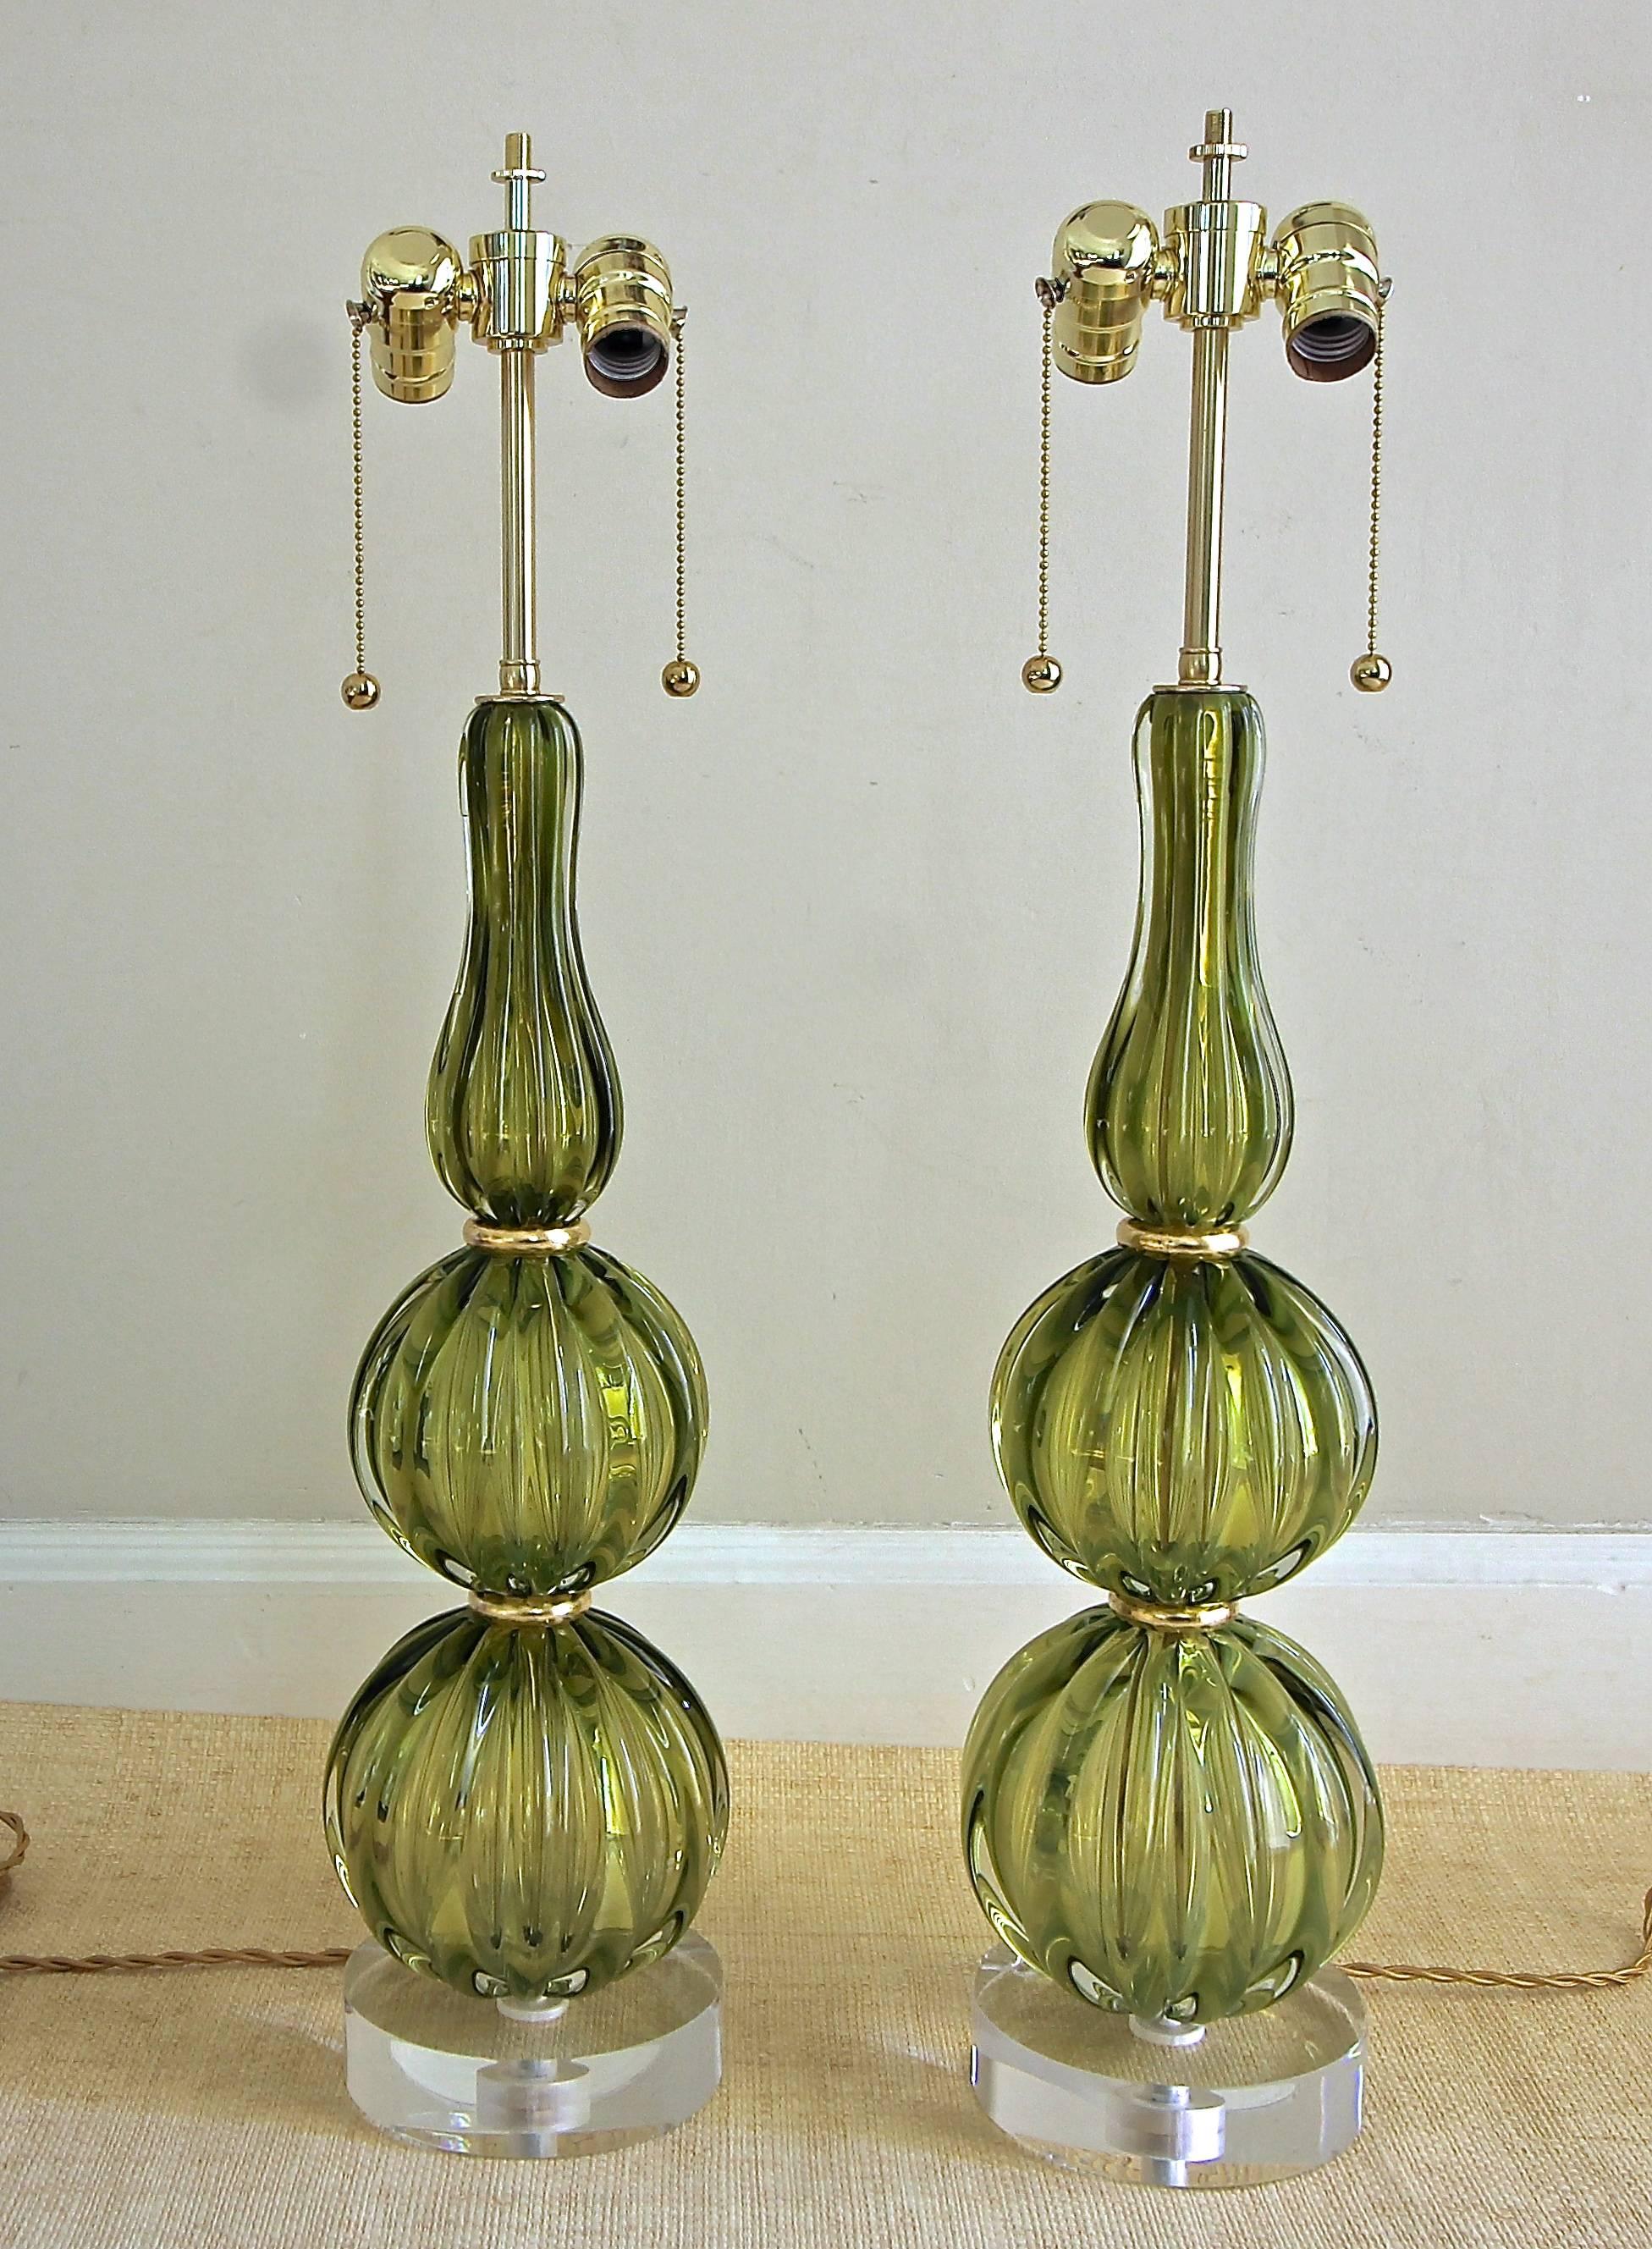 Pair of fabulous Murano thick handblown absinthe (green) colored ribbed table lamps by Seguso. Mounted on new custom acrylic bases with double cluster solid brass fittings, giltwood spacers and French-style rayon covered cords. Newly wired for US.